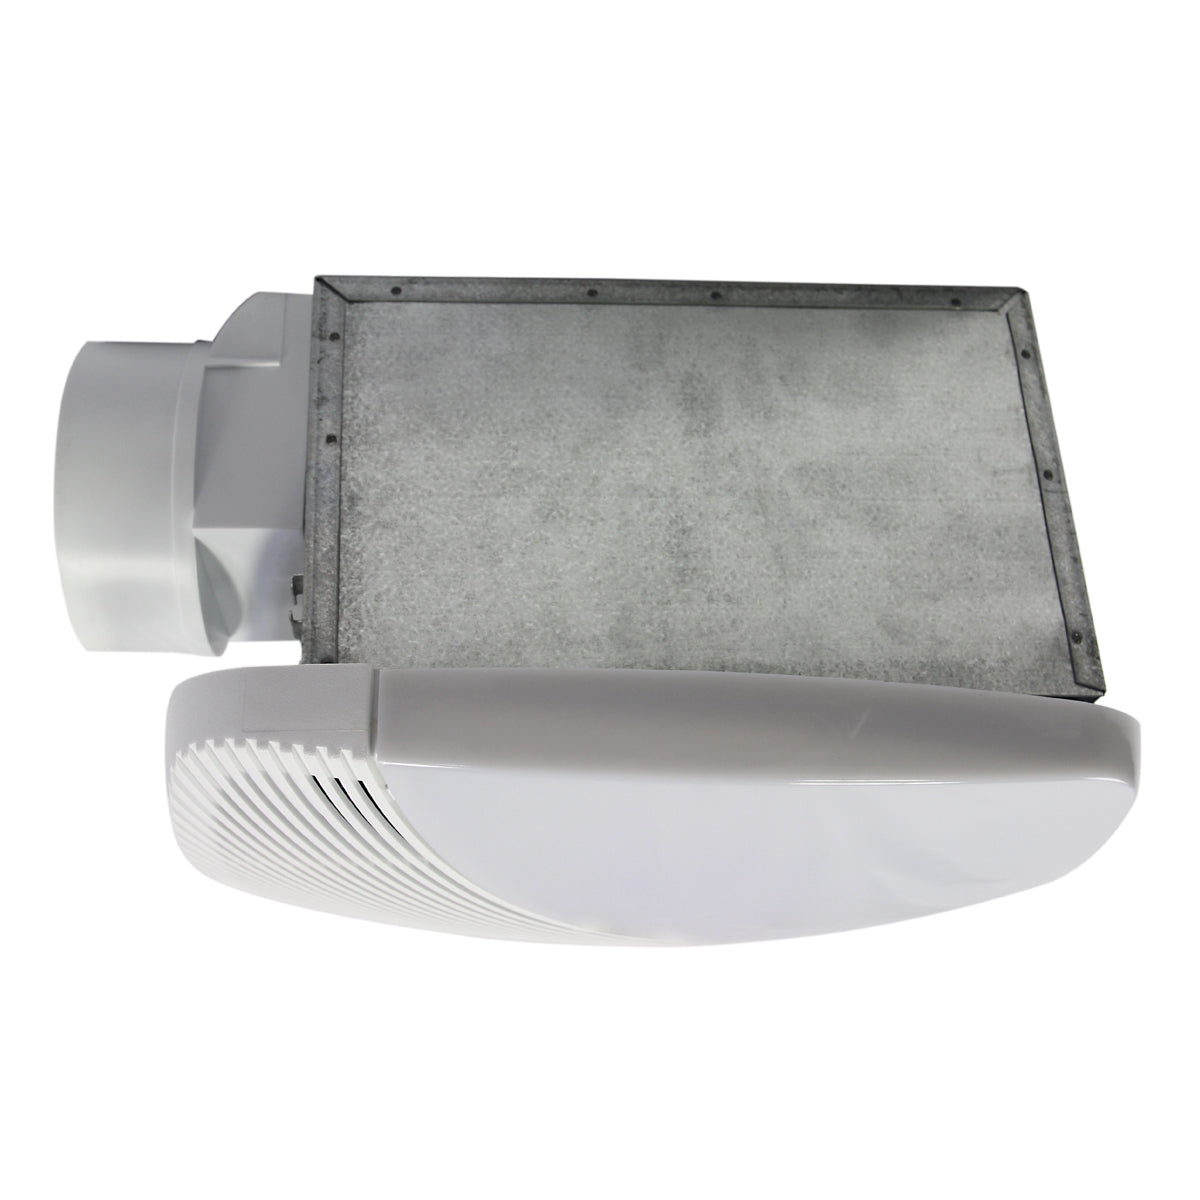 NuVent MS Series Lighted Ceiling Exhaust Bath Fans